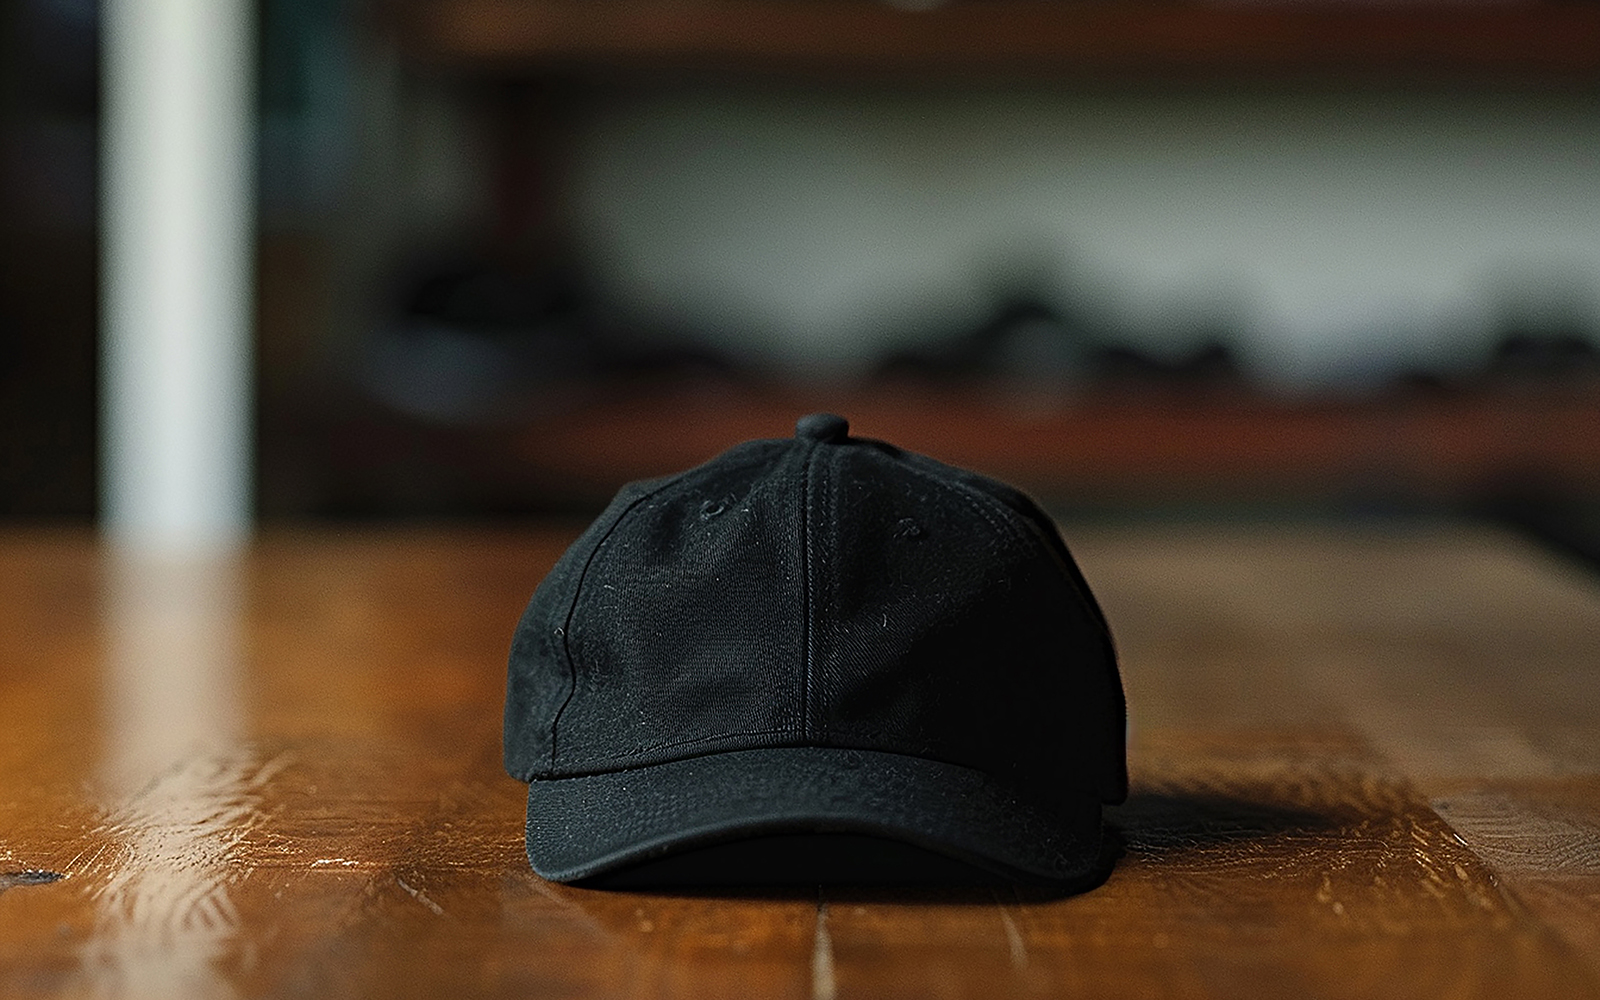 Blank cap_black cap_blank black cap_blank cap on the table_black cap on the wood